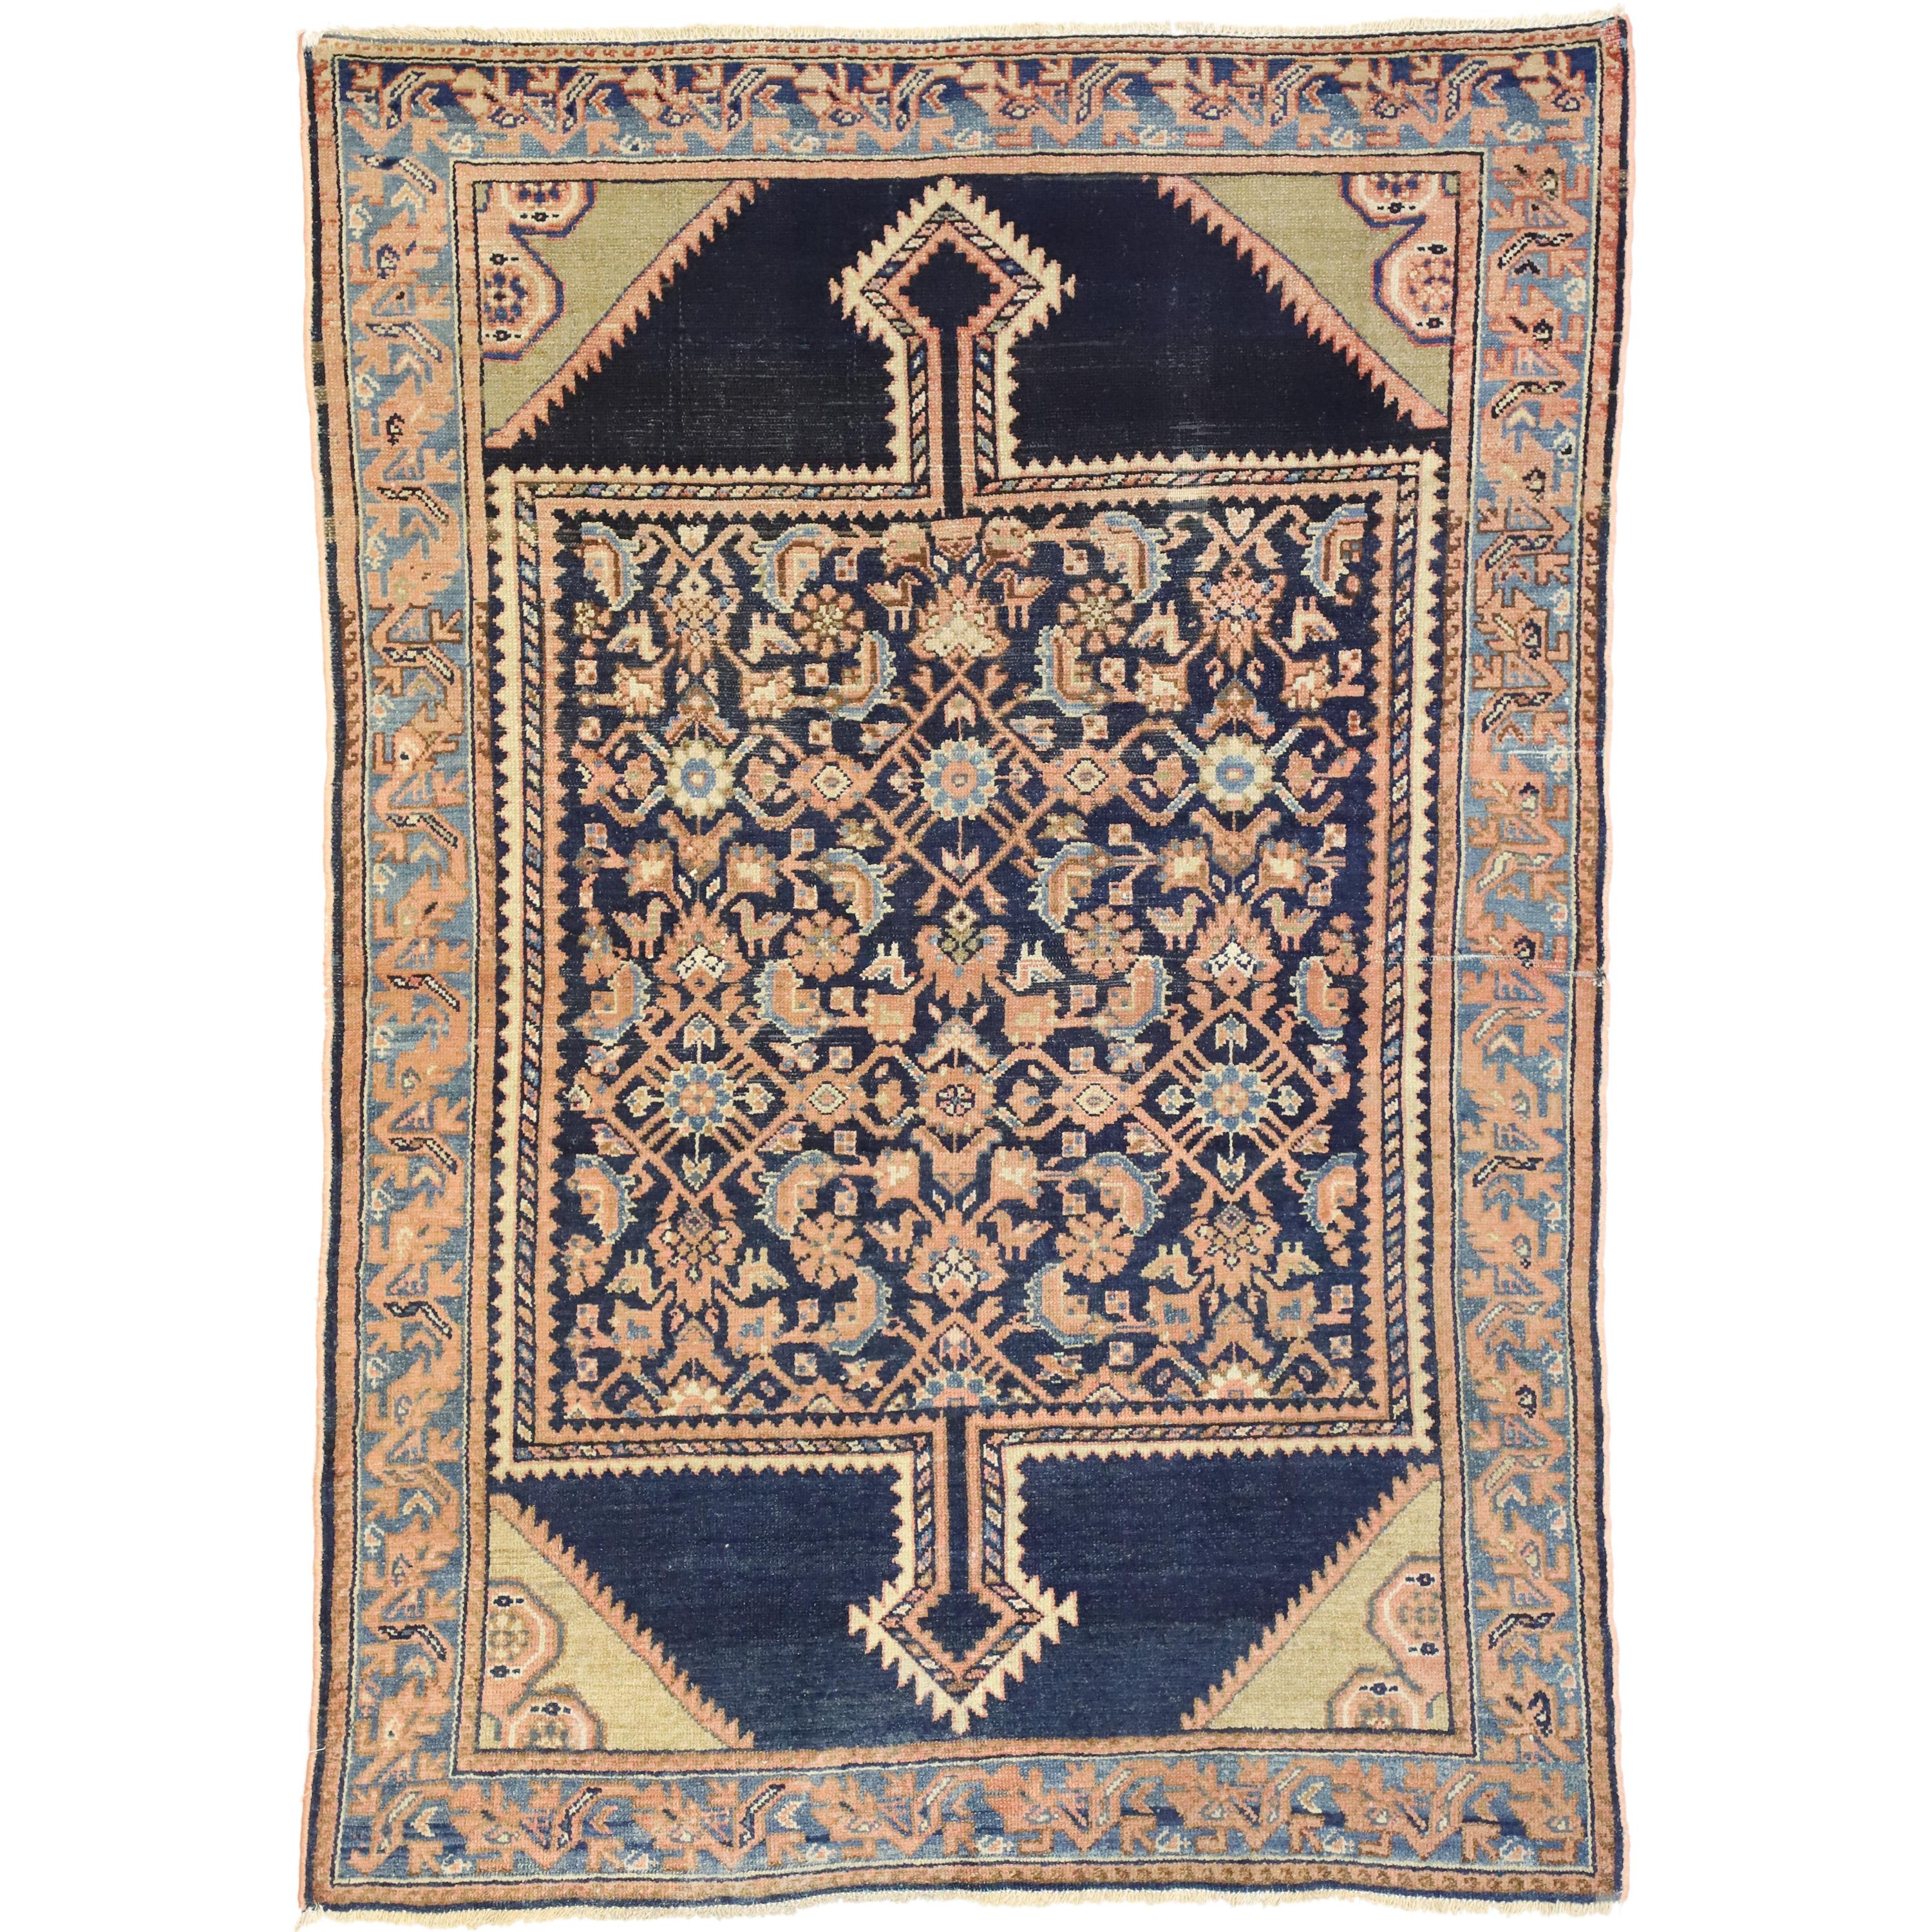 Antique Persian Malayer Rug with Rustic Romantic Georgian Style